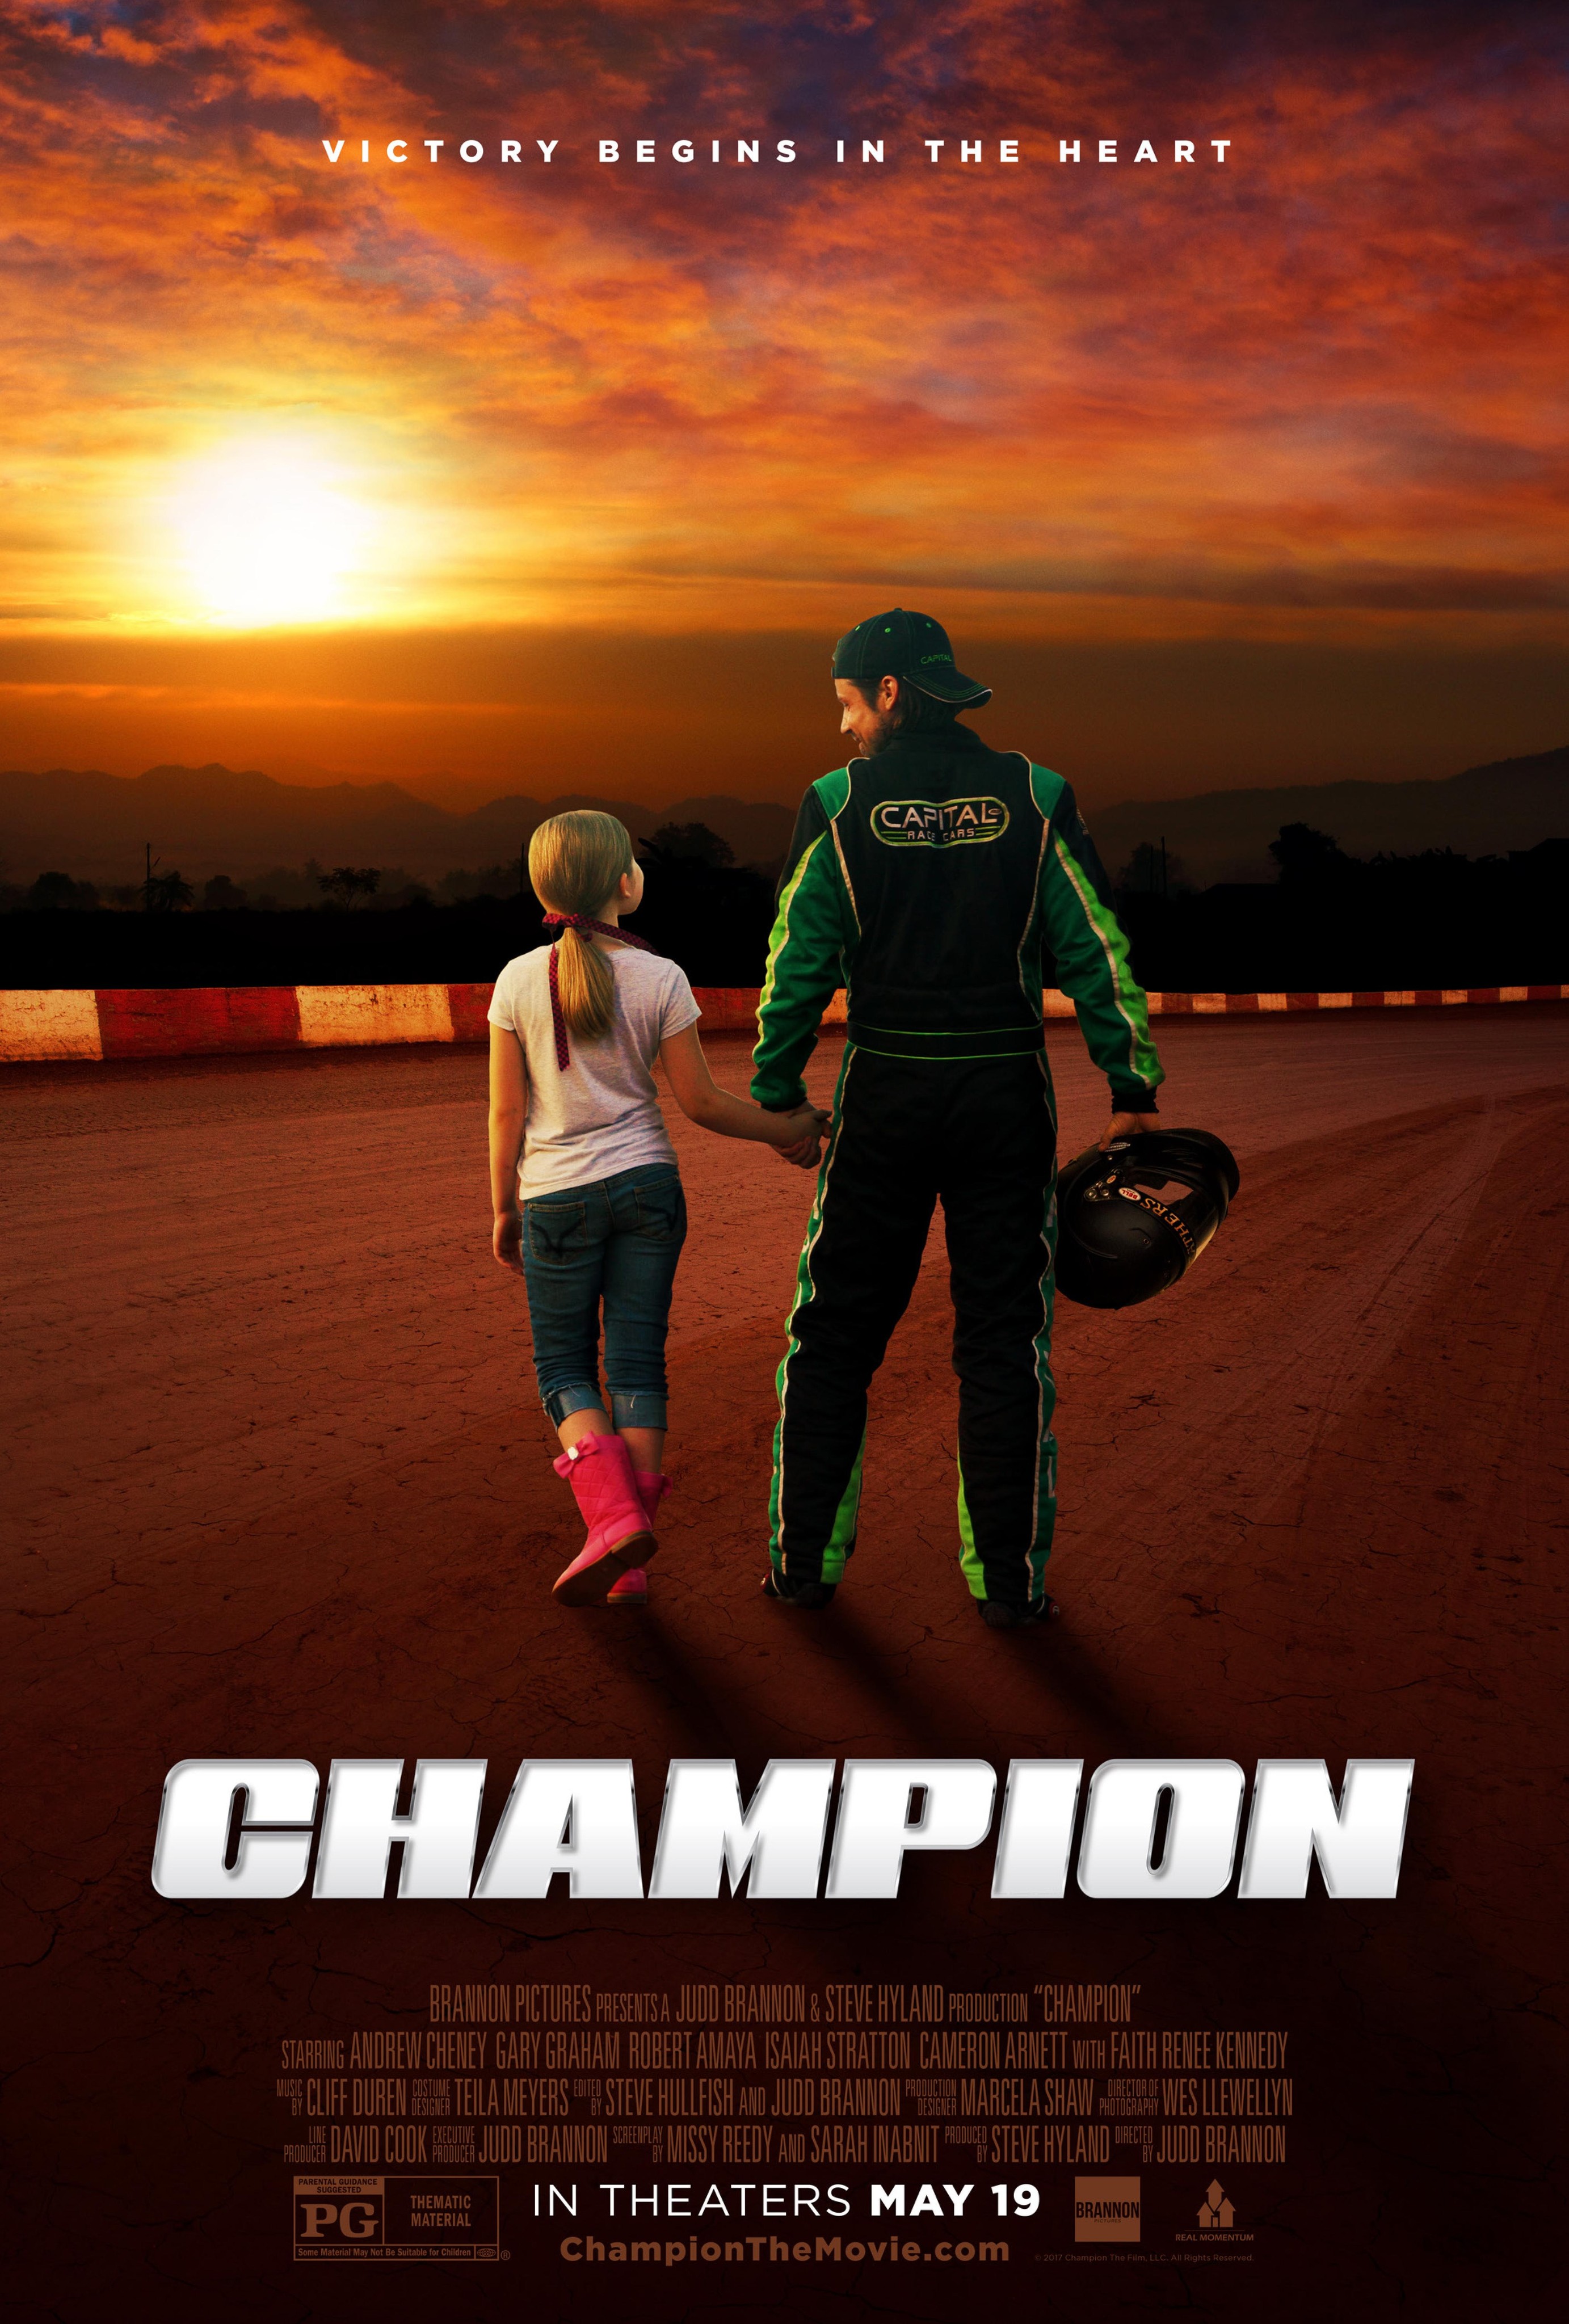 Who Is The Champion? (2018) Showtimes, Tickets & Reviews